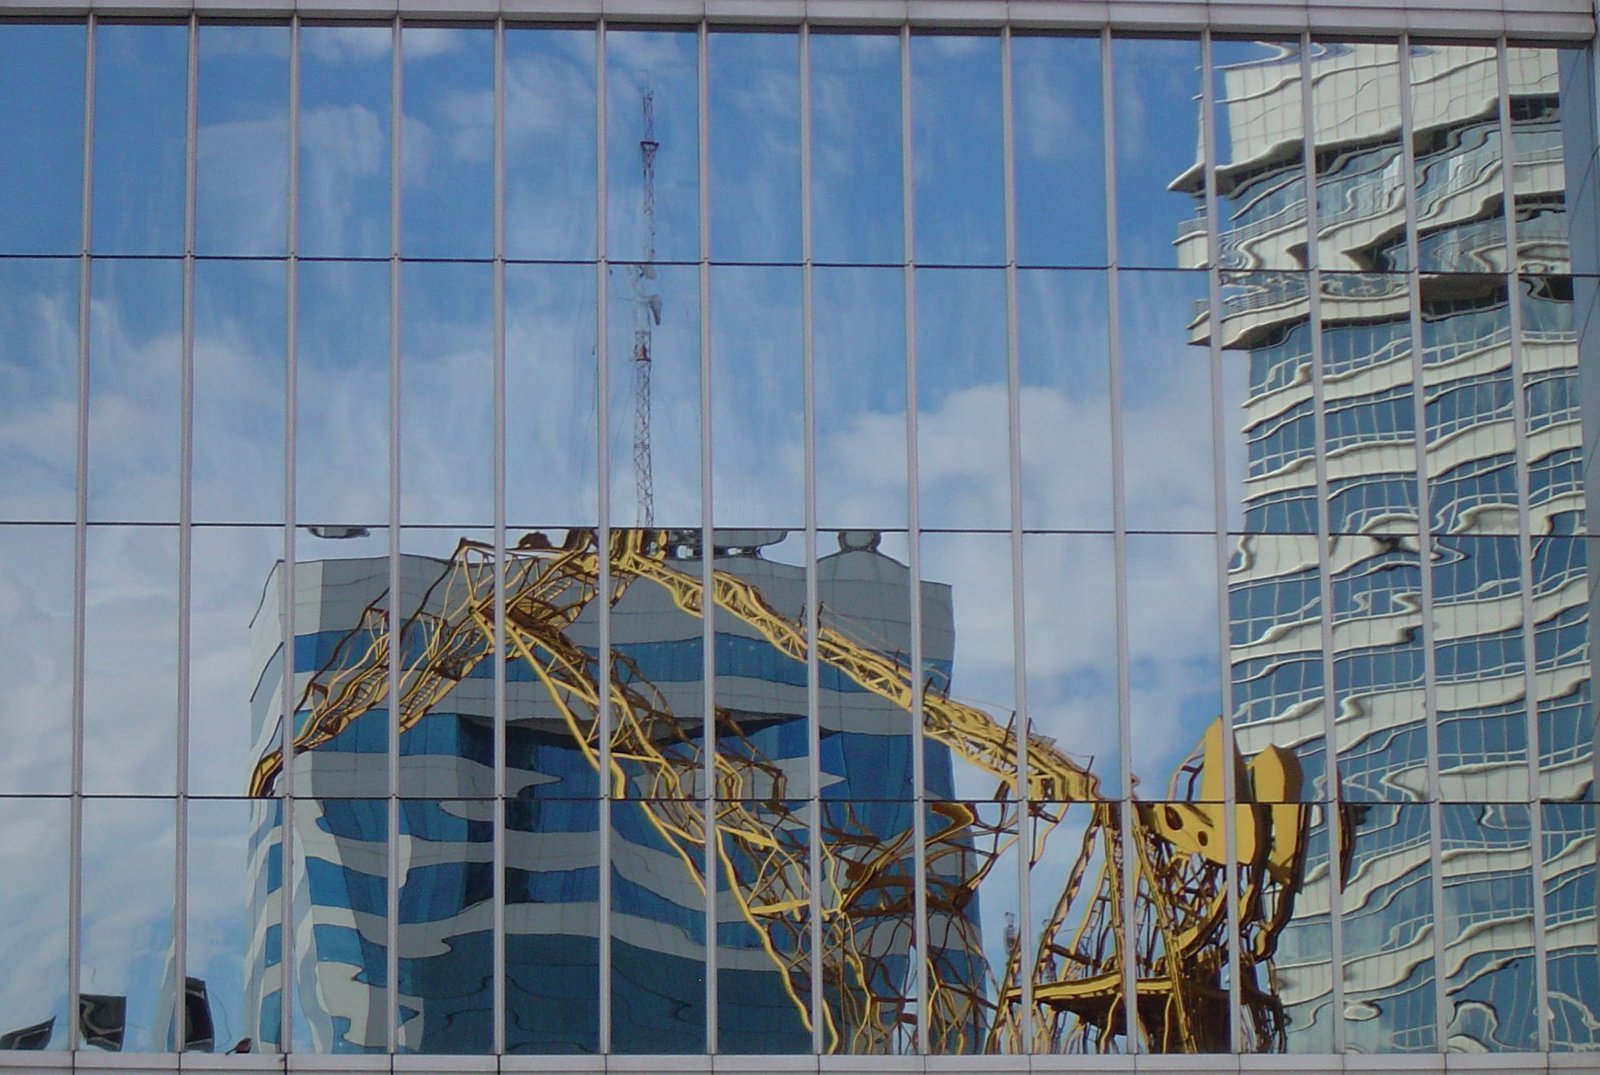 large crane being reflected in the side of a building